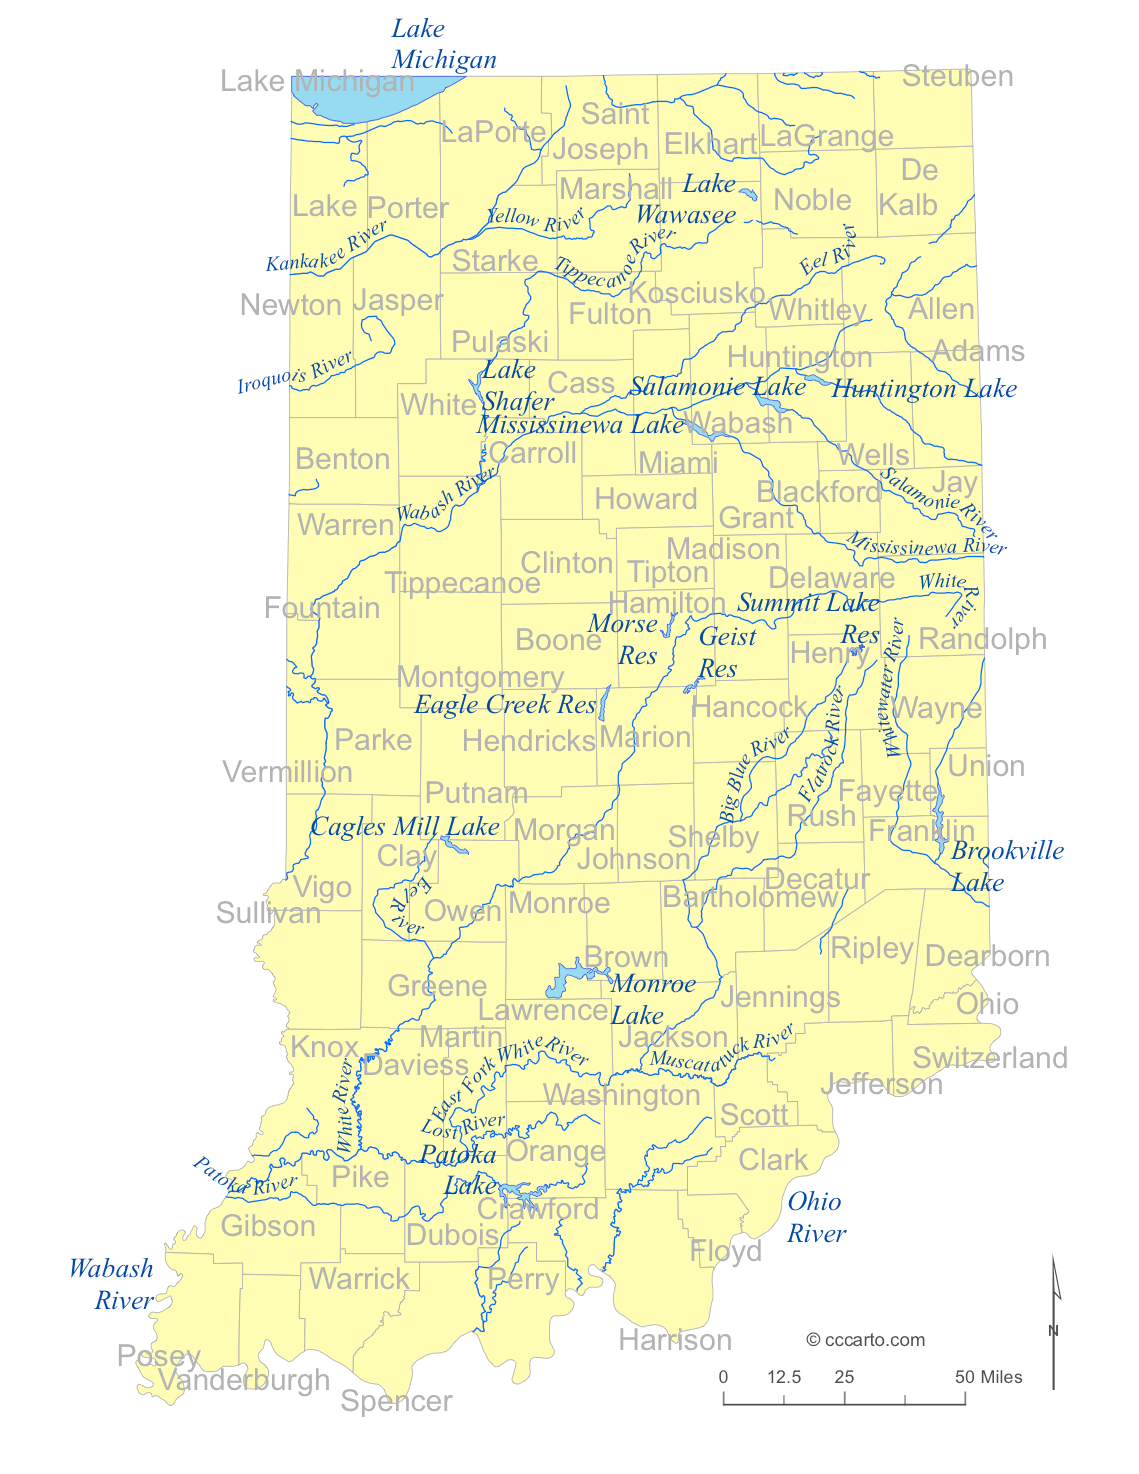 Indiana Lakes and River Maps